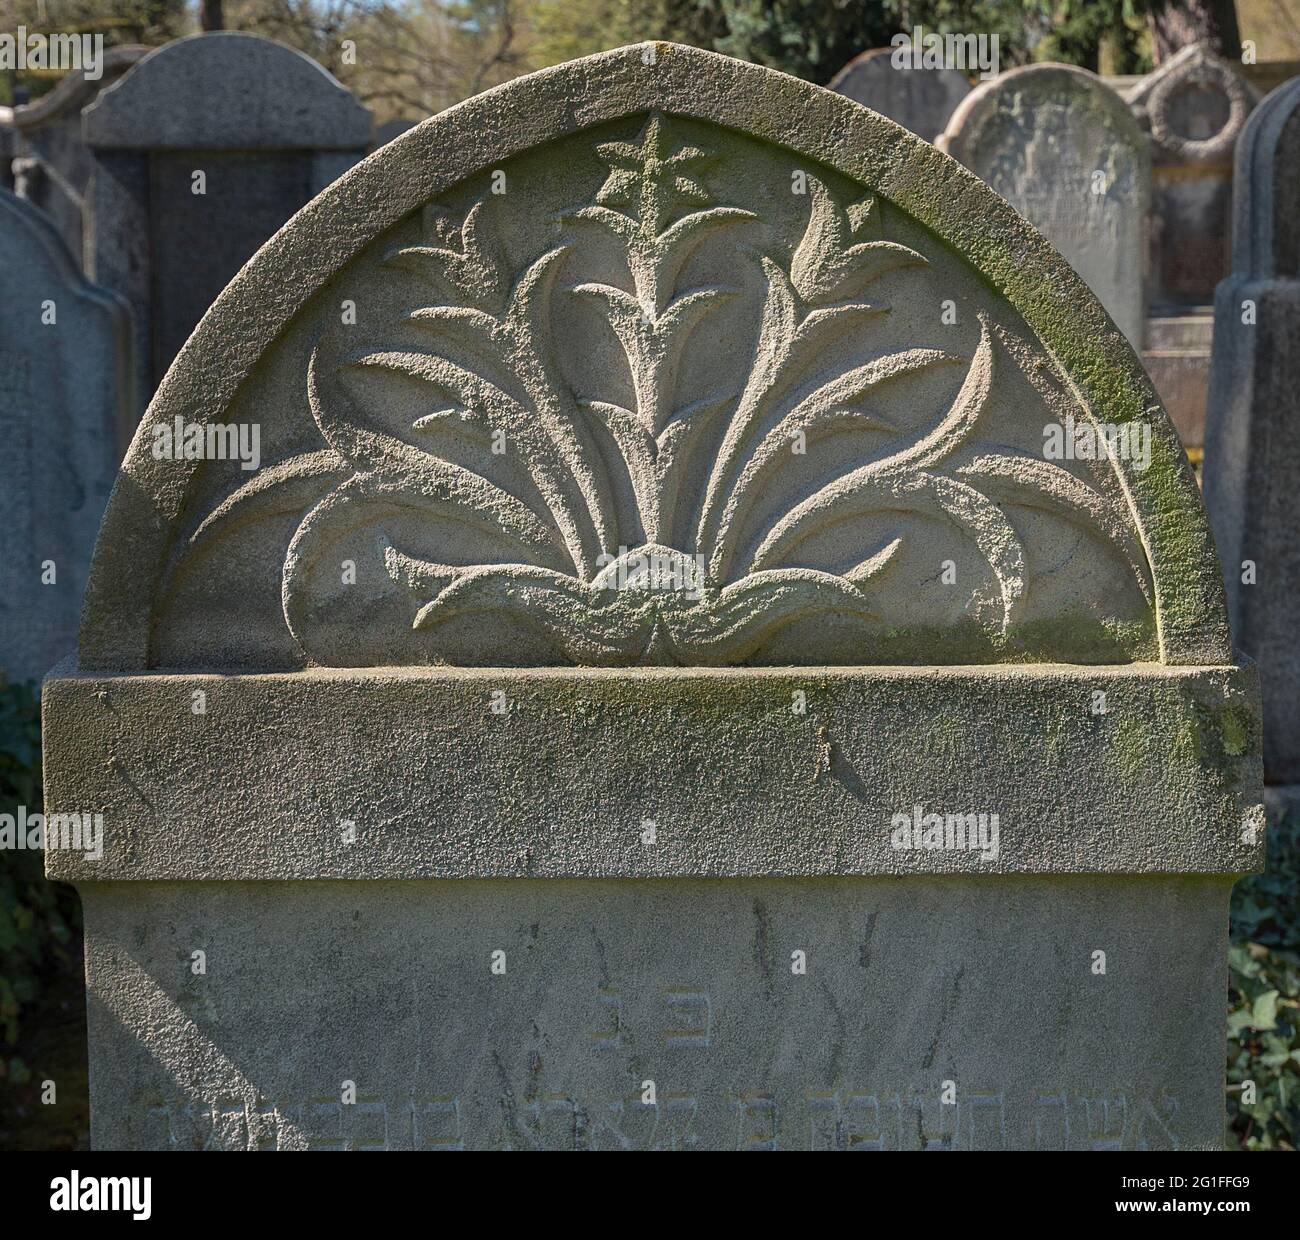 Lily relief on a Jewish gravestone, symbol of purity and innocence, New Jewish Cemetery, Nuremberg, Middle Franconia, Bavaria, Germany Stock Photo